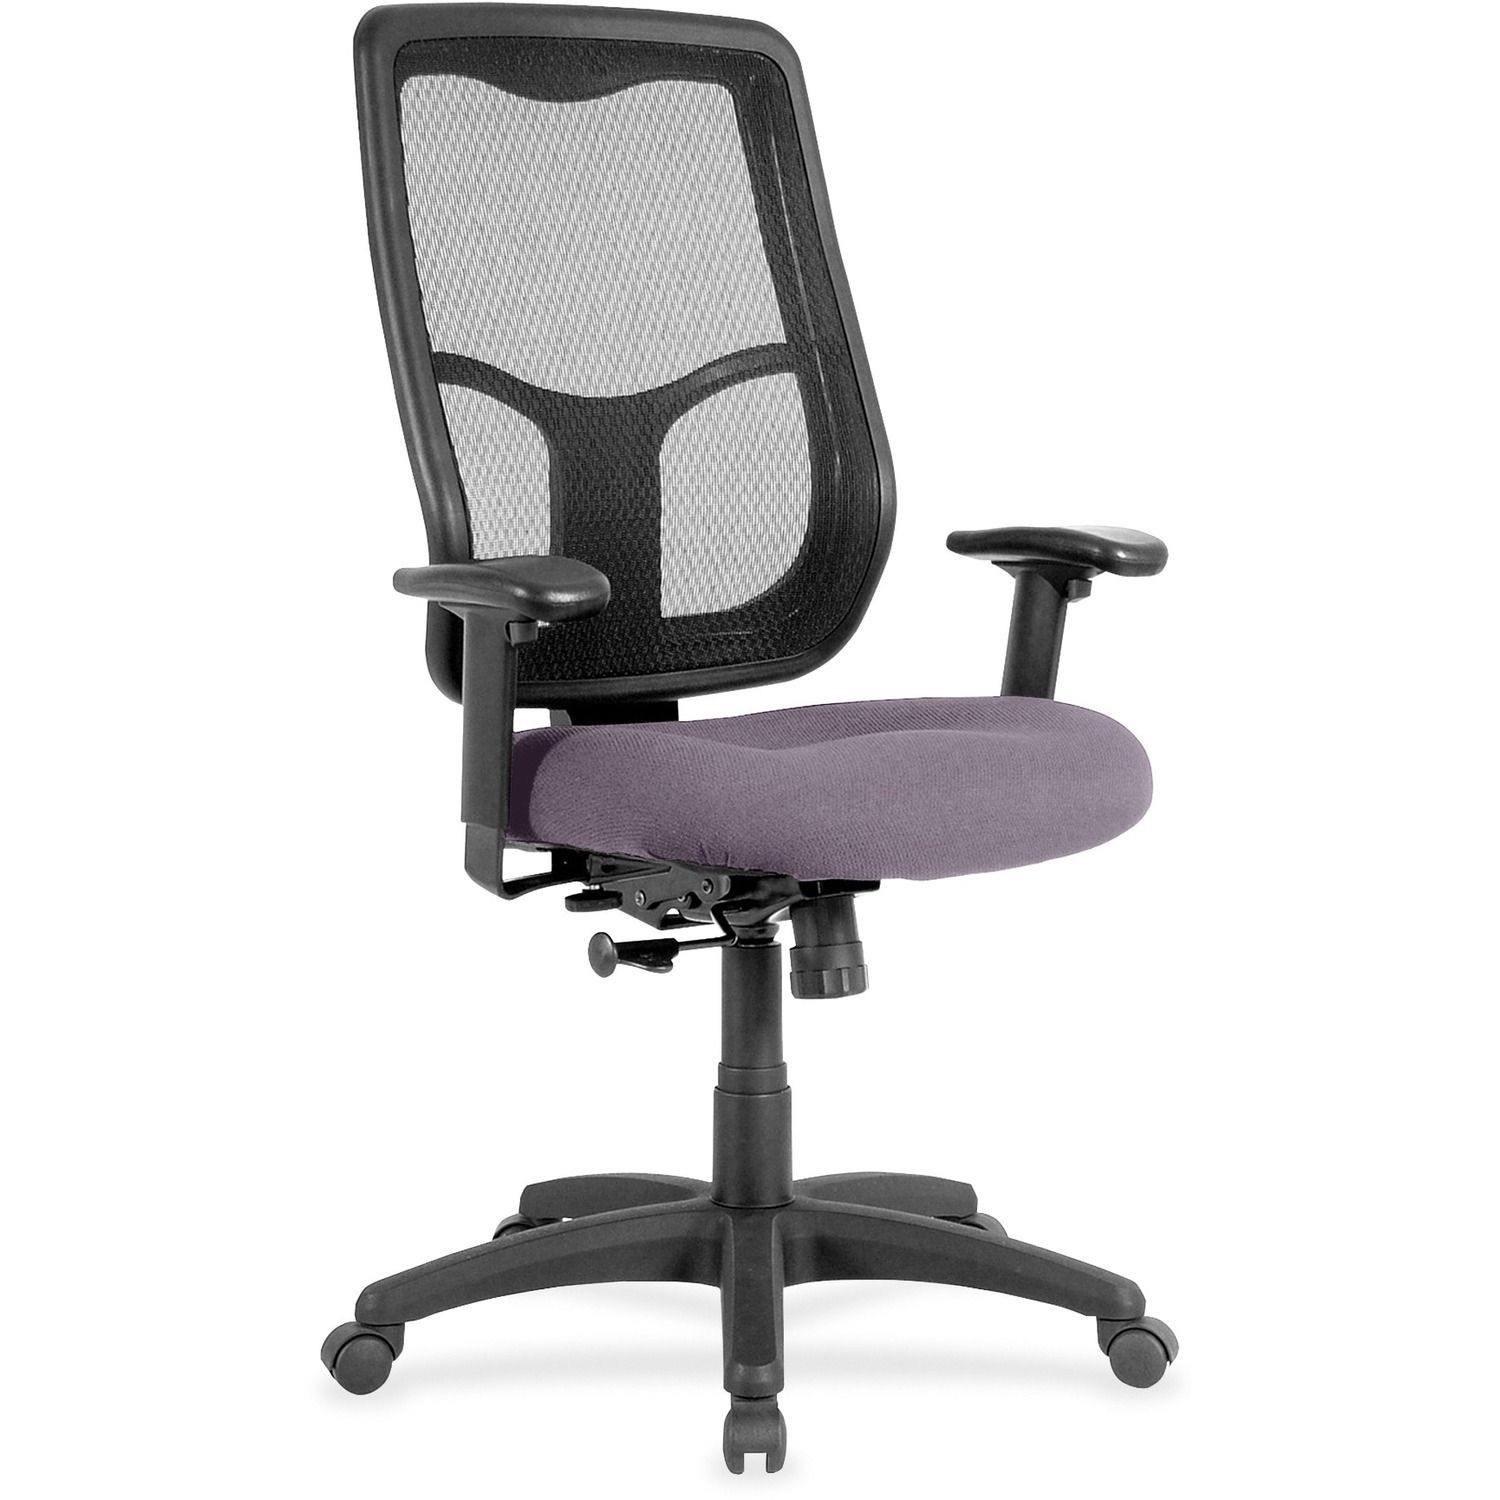 Apollo High-back with Ratchet Back Violet Fabric Seat, High Back, 5-star Base, 1 Each